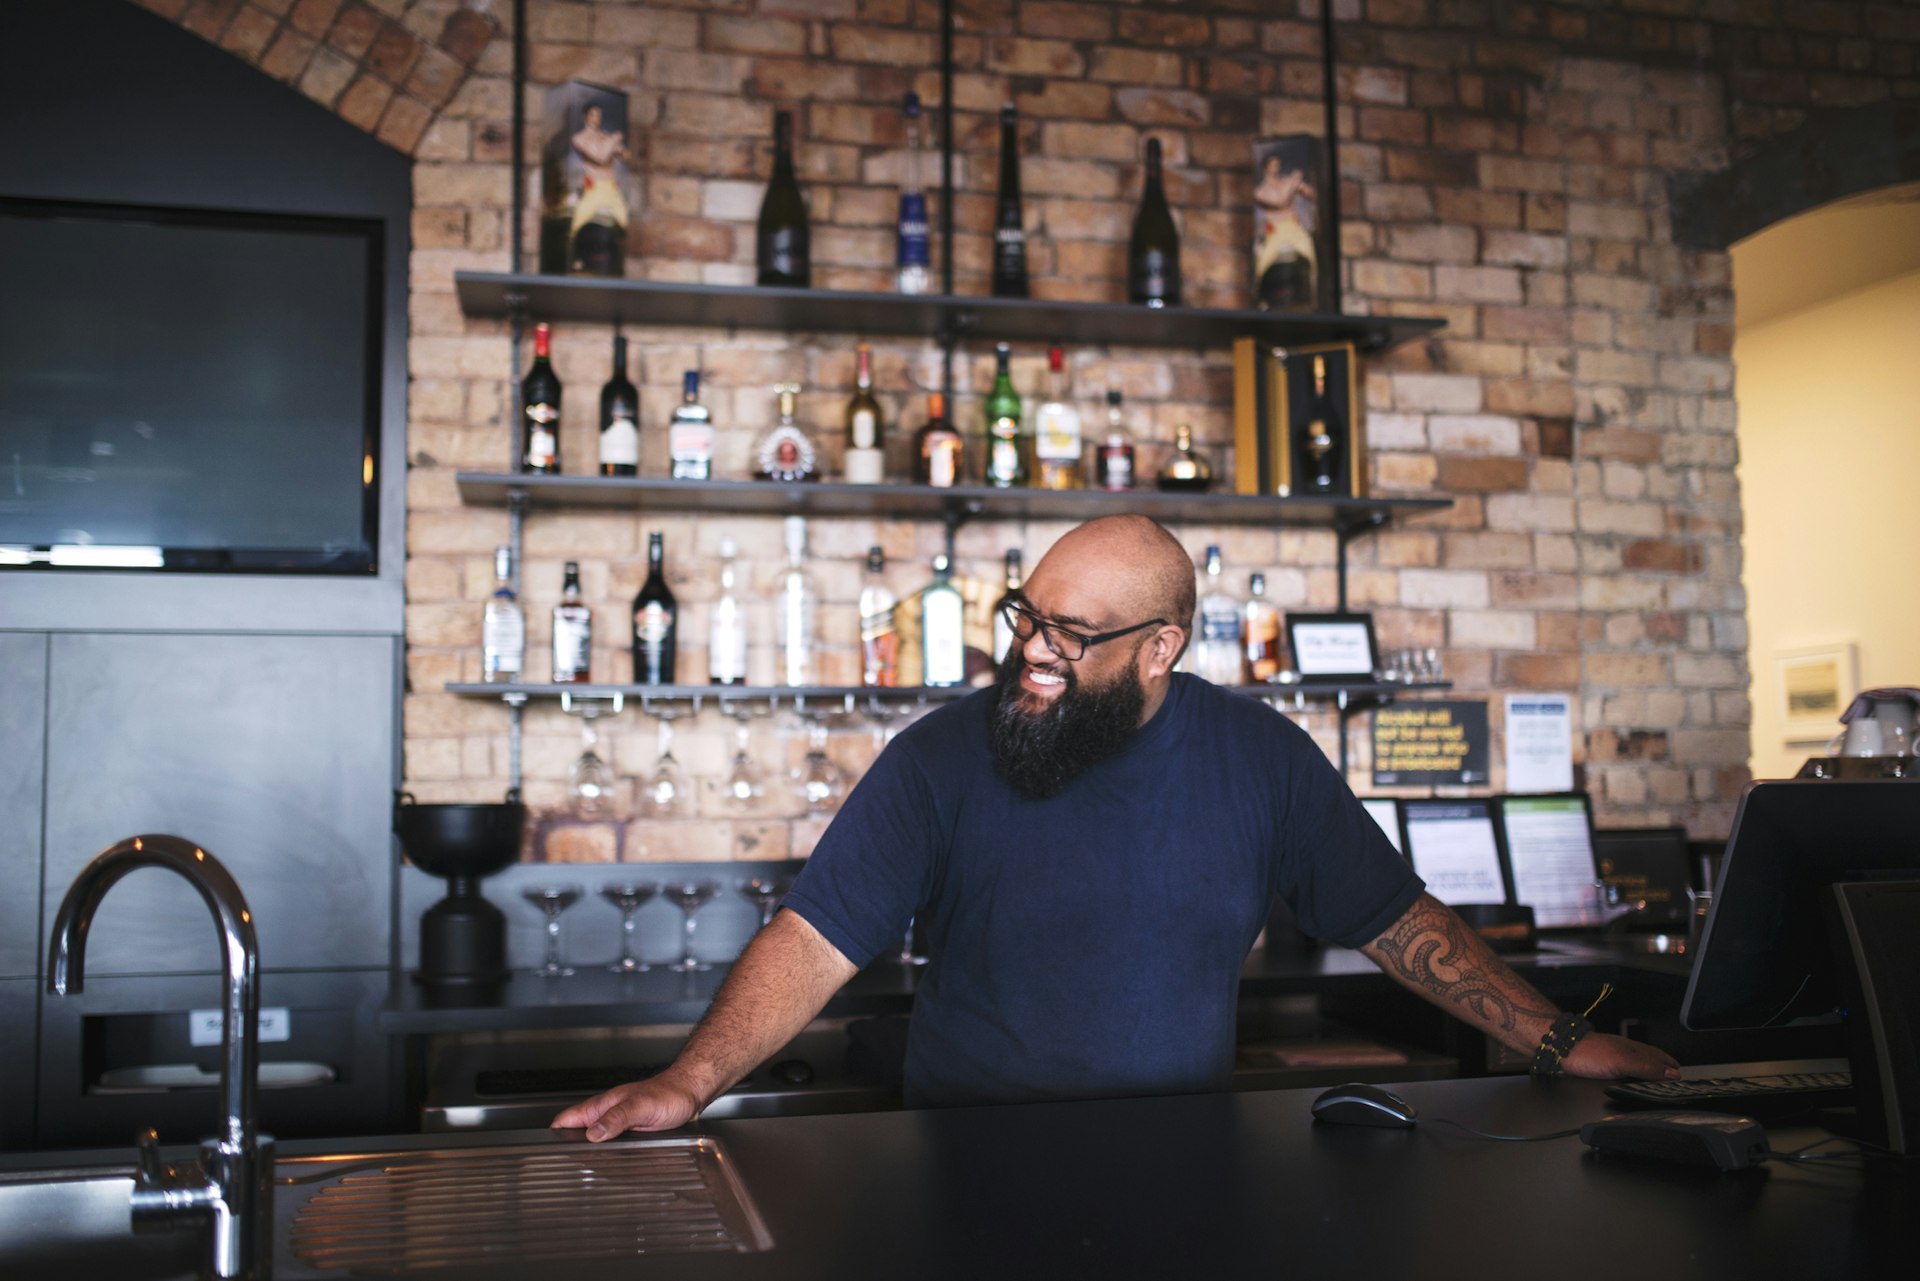 A man smiles as he stands behind a bar in a pub